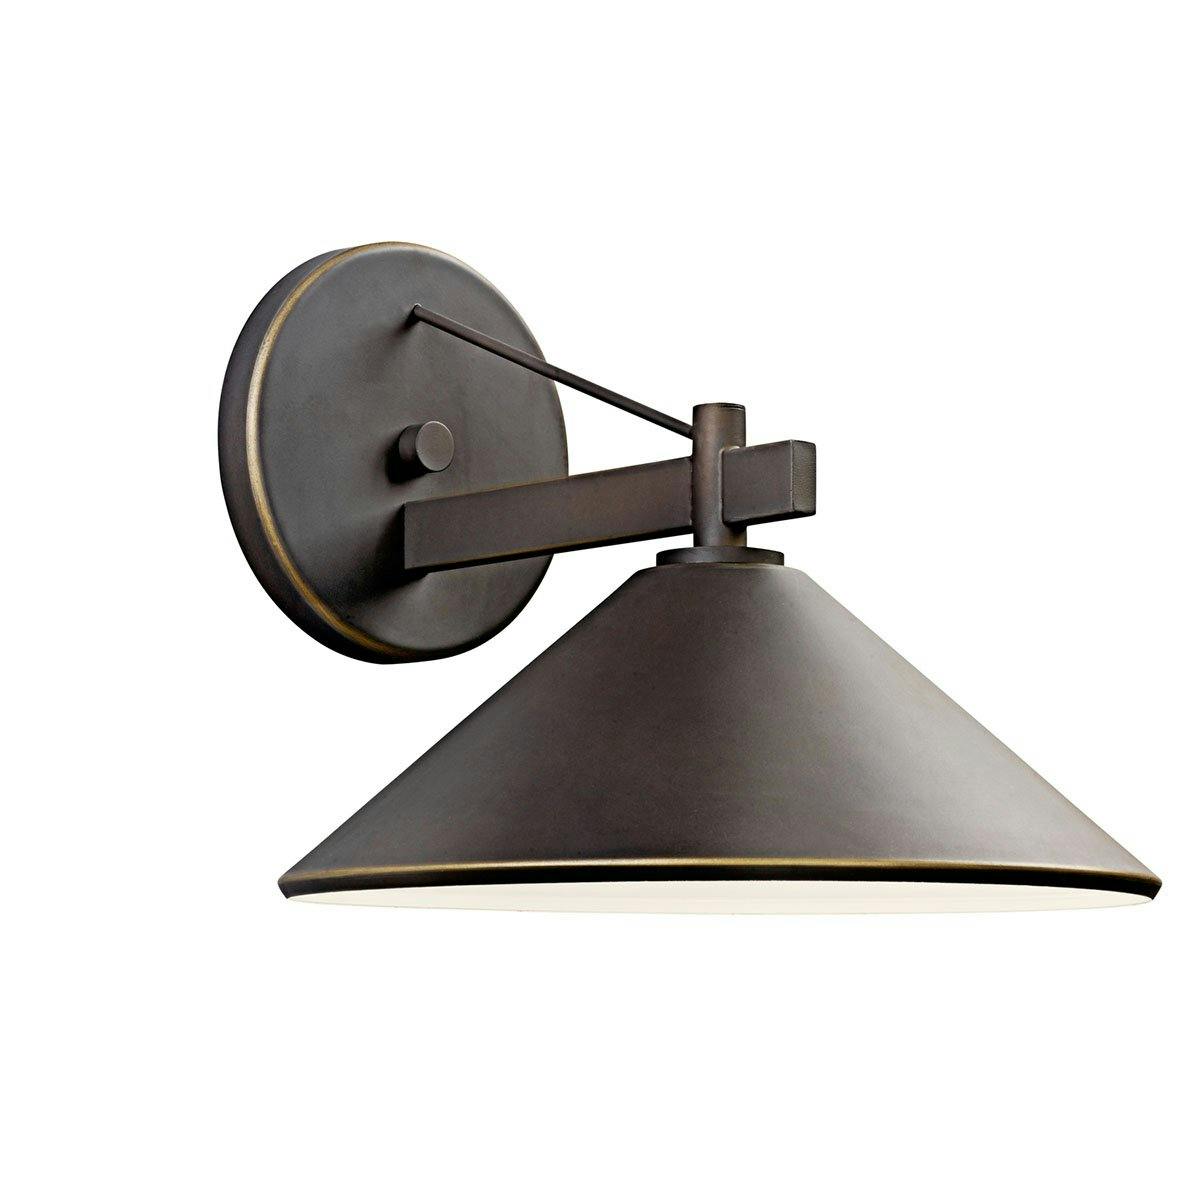 Ripley 10" Wall Light Olde Bronze® on a white background